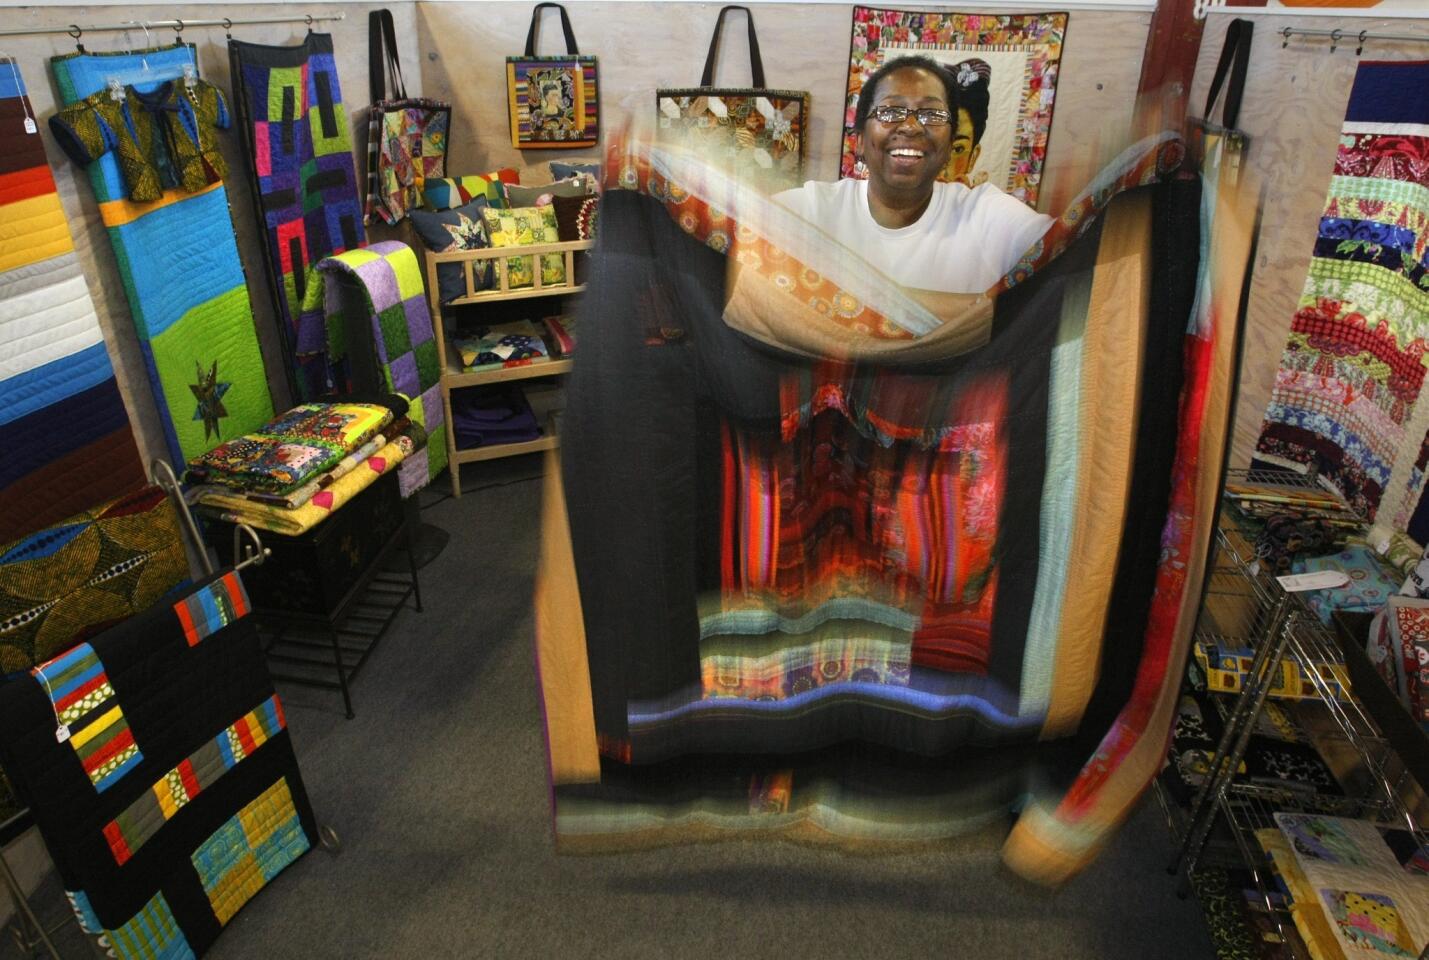 Patsy Johnson, 58, holds one of the many quilts that she designs, makes and sells at Crafted at the Port of Los Angeles. Johnson quit a 25-year career as an insurance broker, saying she was tired of corporate life.